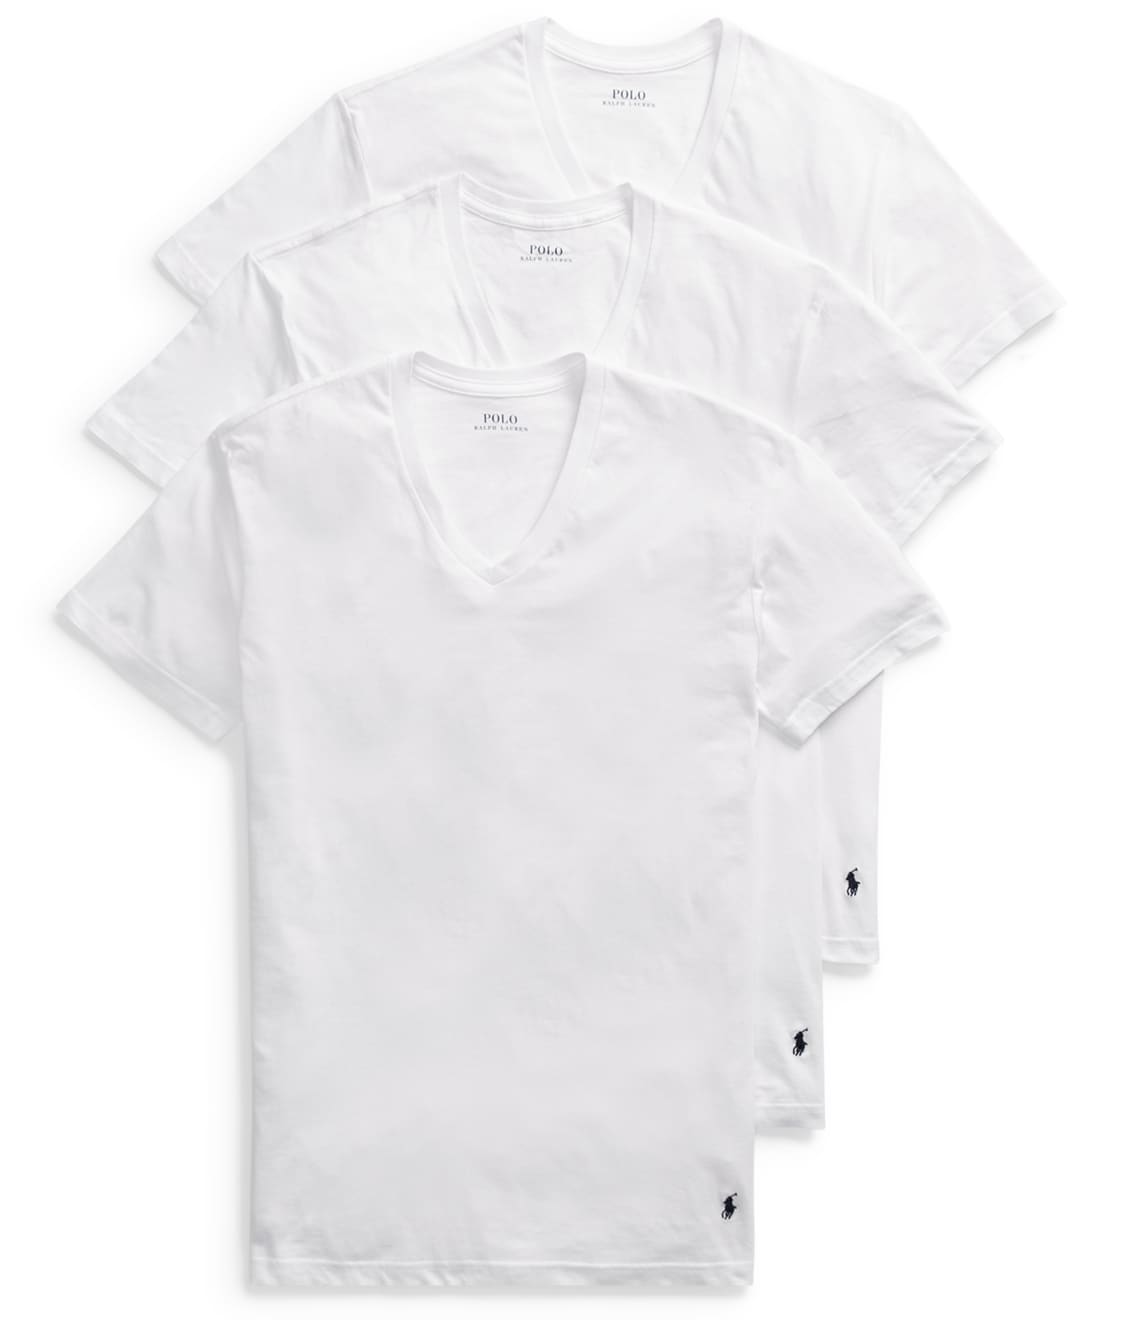 Polo Ralph Lauren Classic V-Neck T-Shirts 3-Pack & Reviews | Bare ...